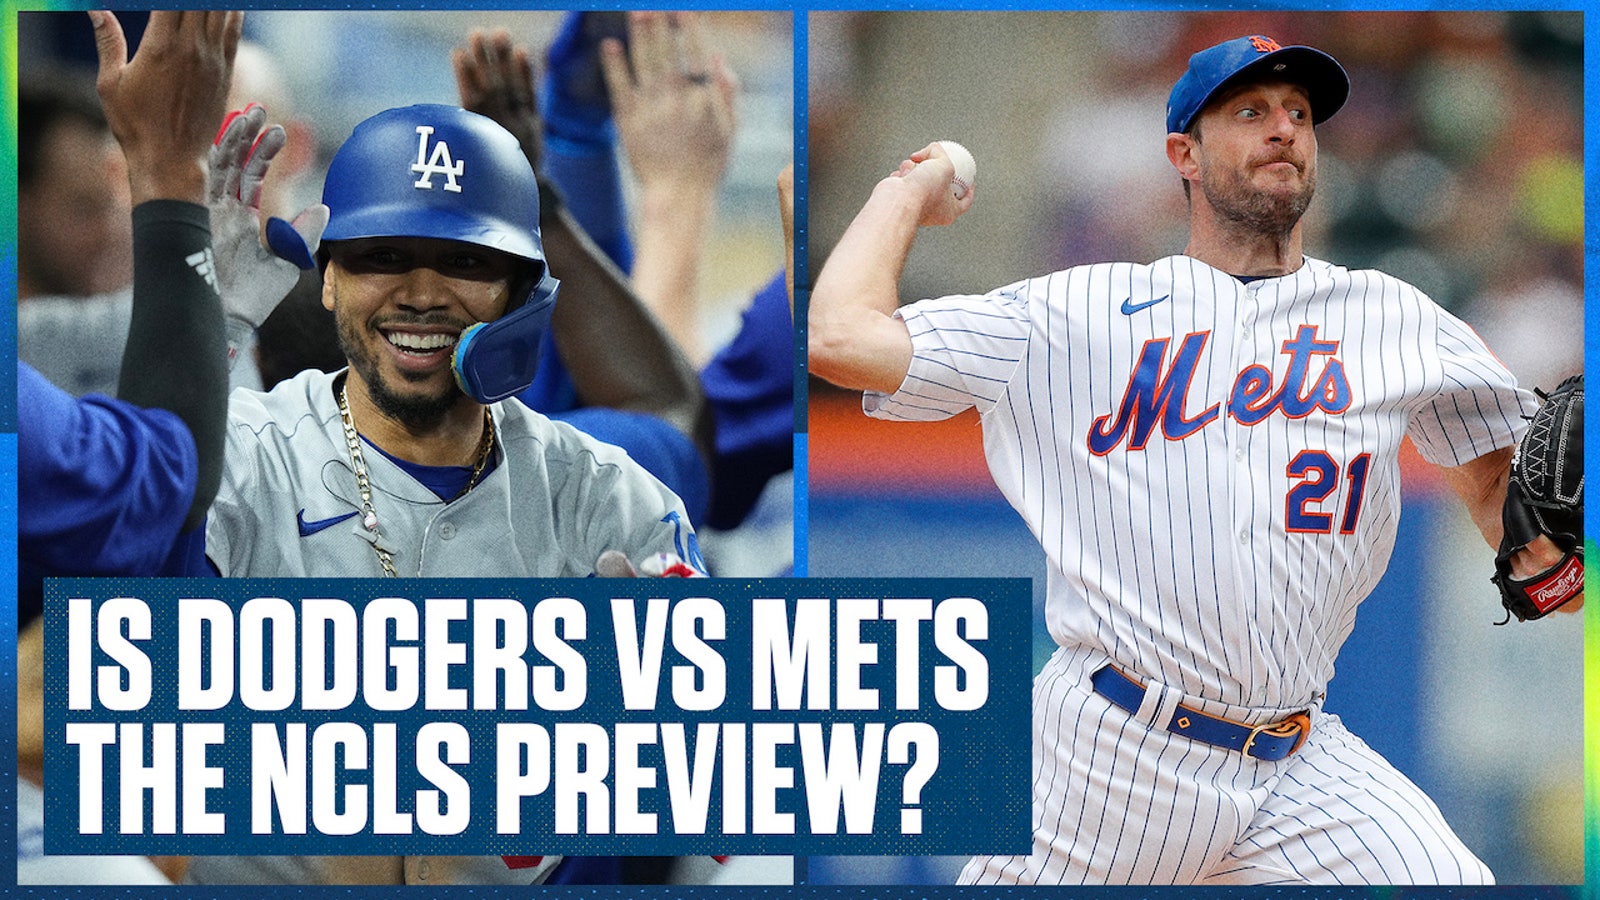 Mets vs. Dodgers: An NLCS preview?